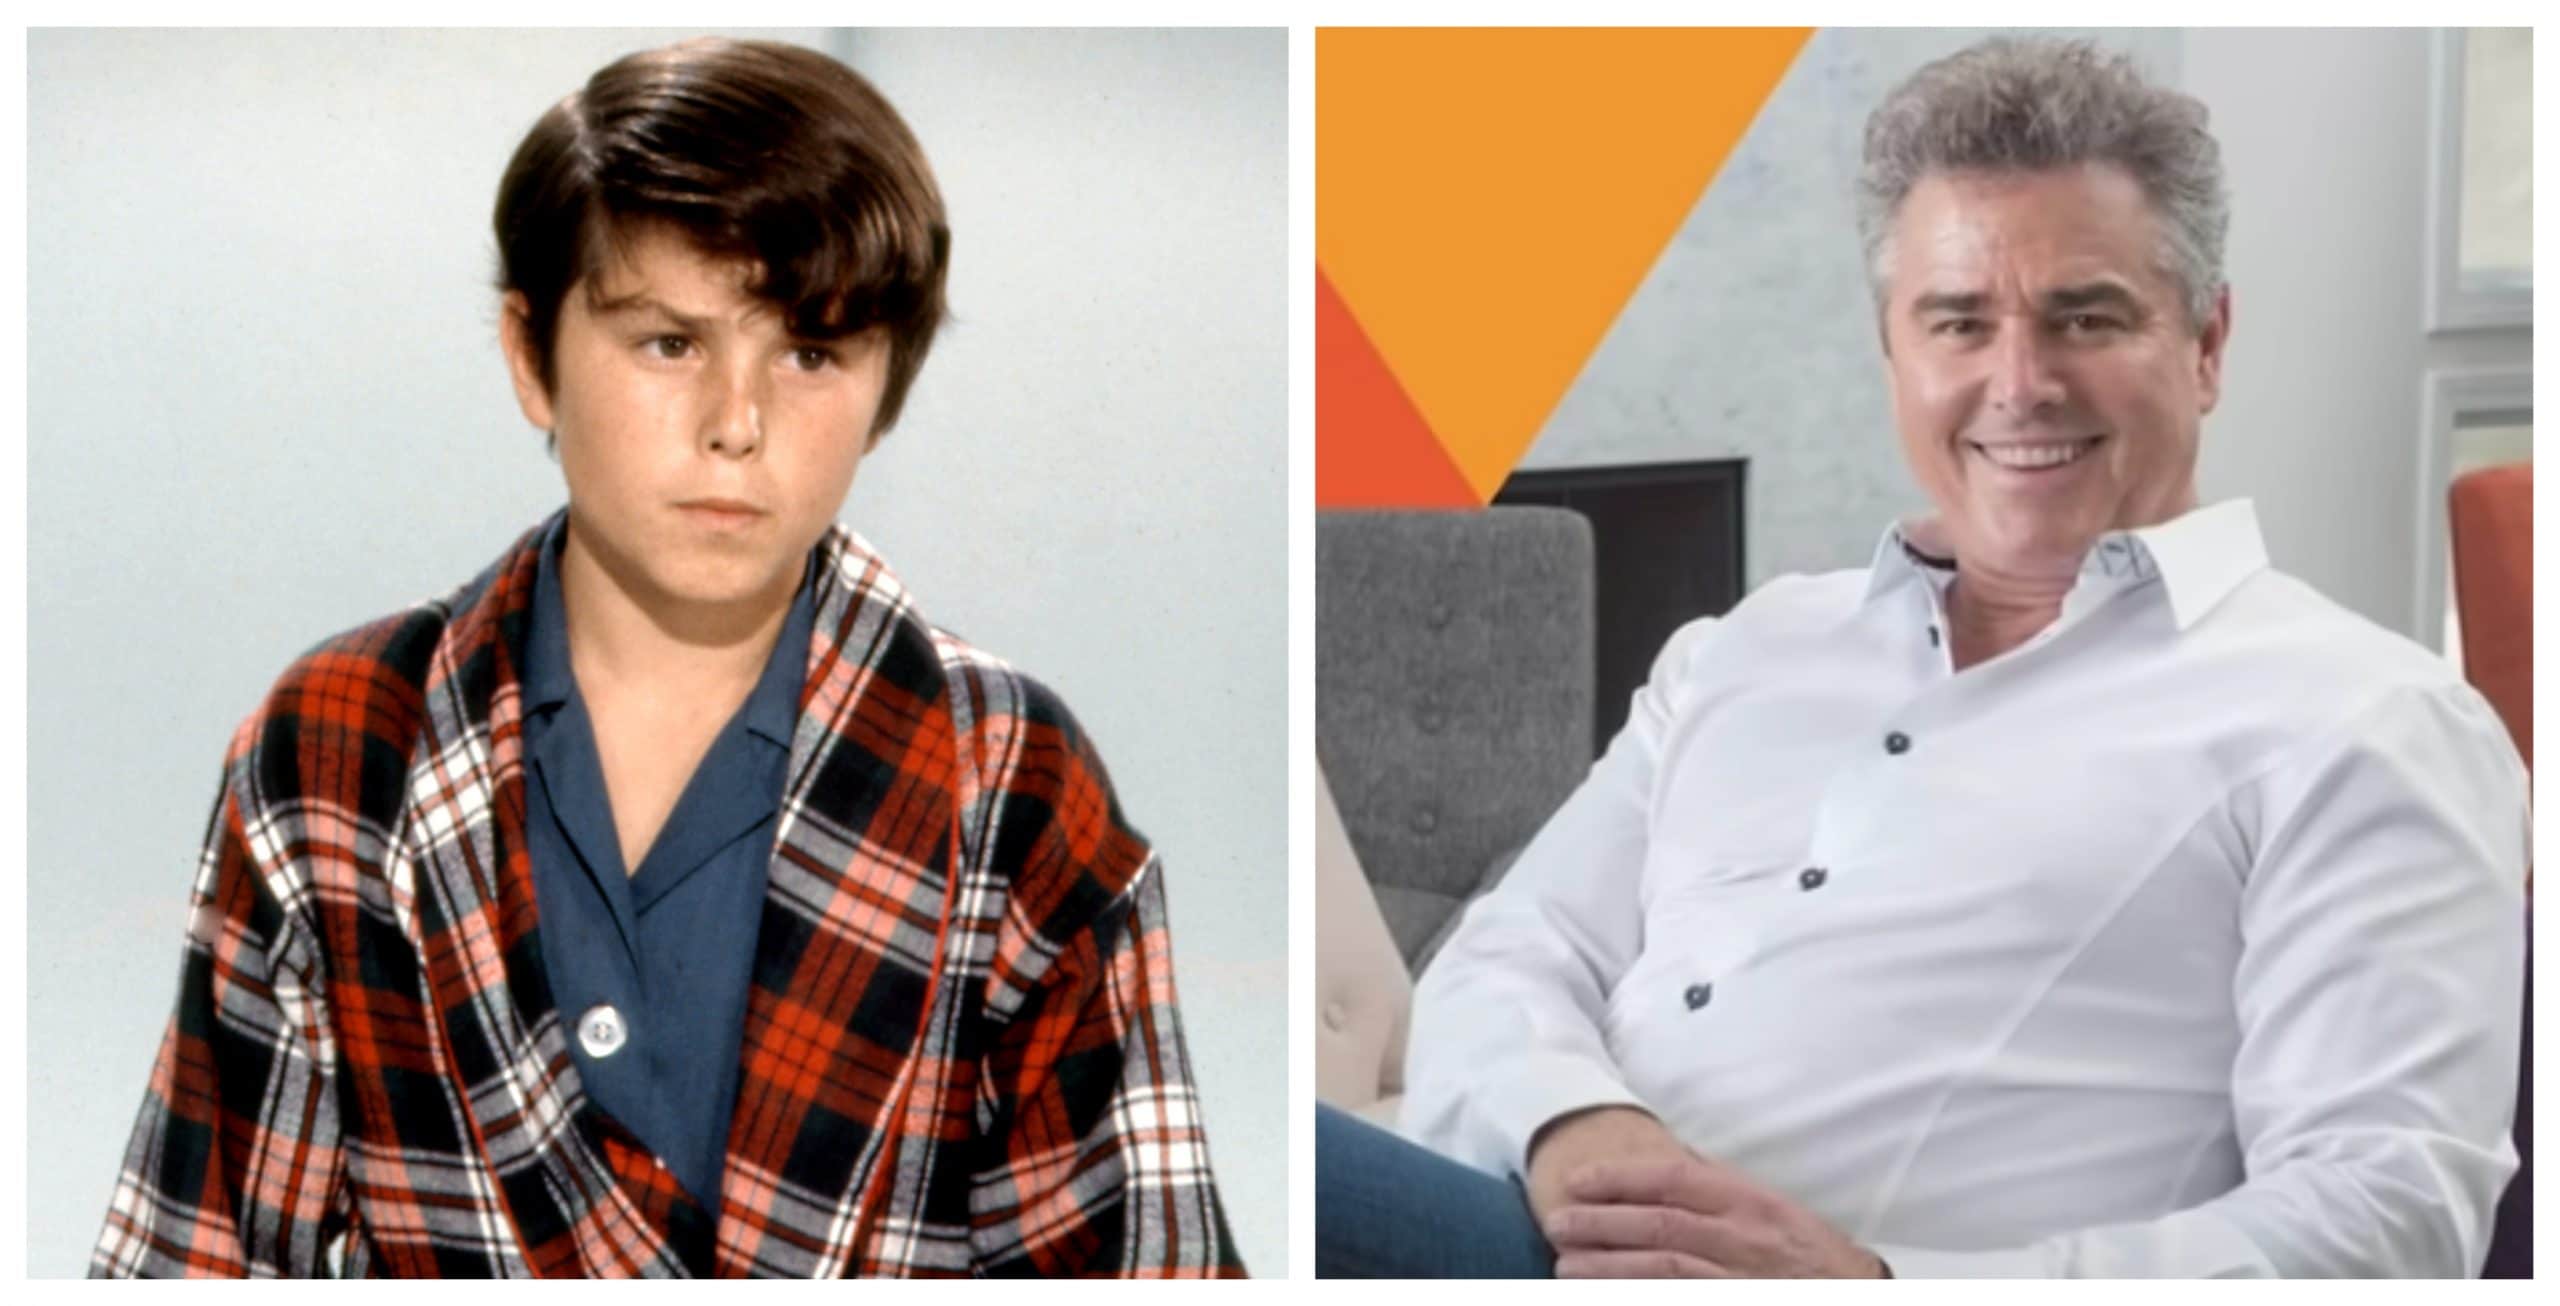 The Cast Of 'The Brady Bunch' Then And Now 2021